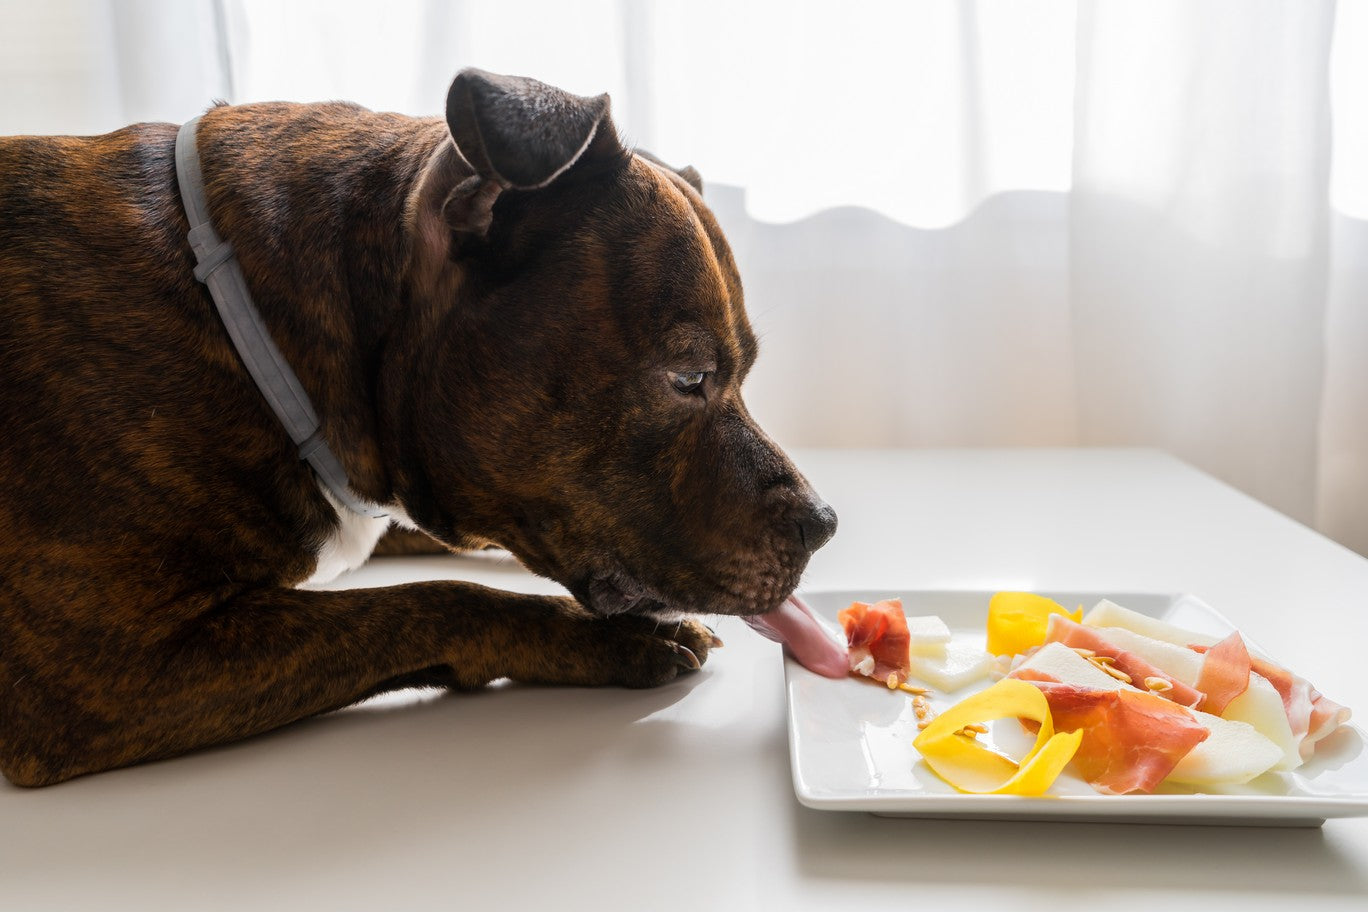 is cantaloupe safe for dogs